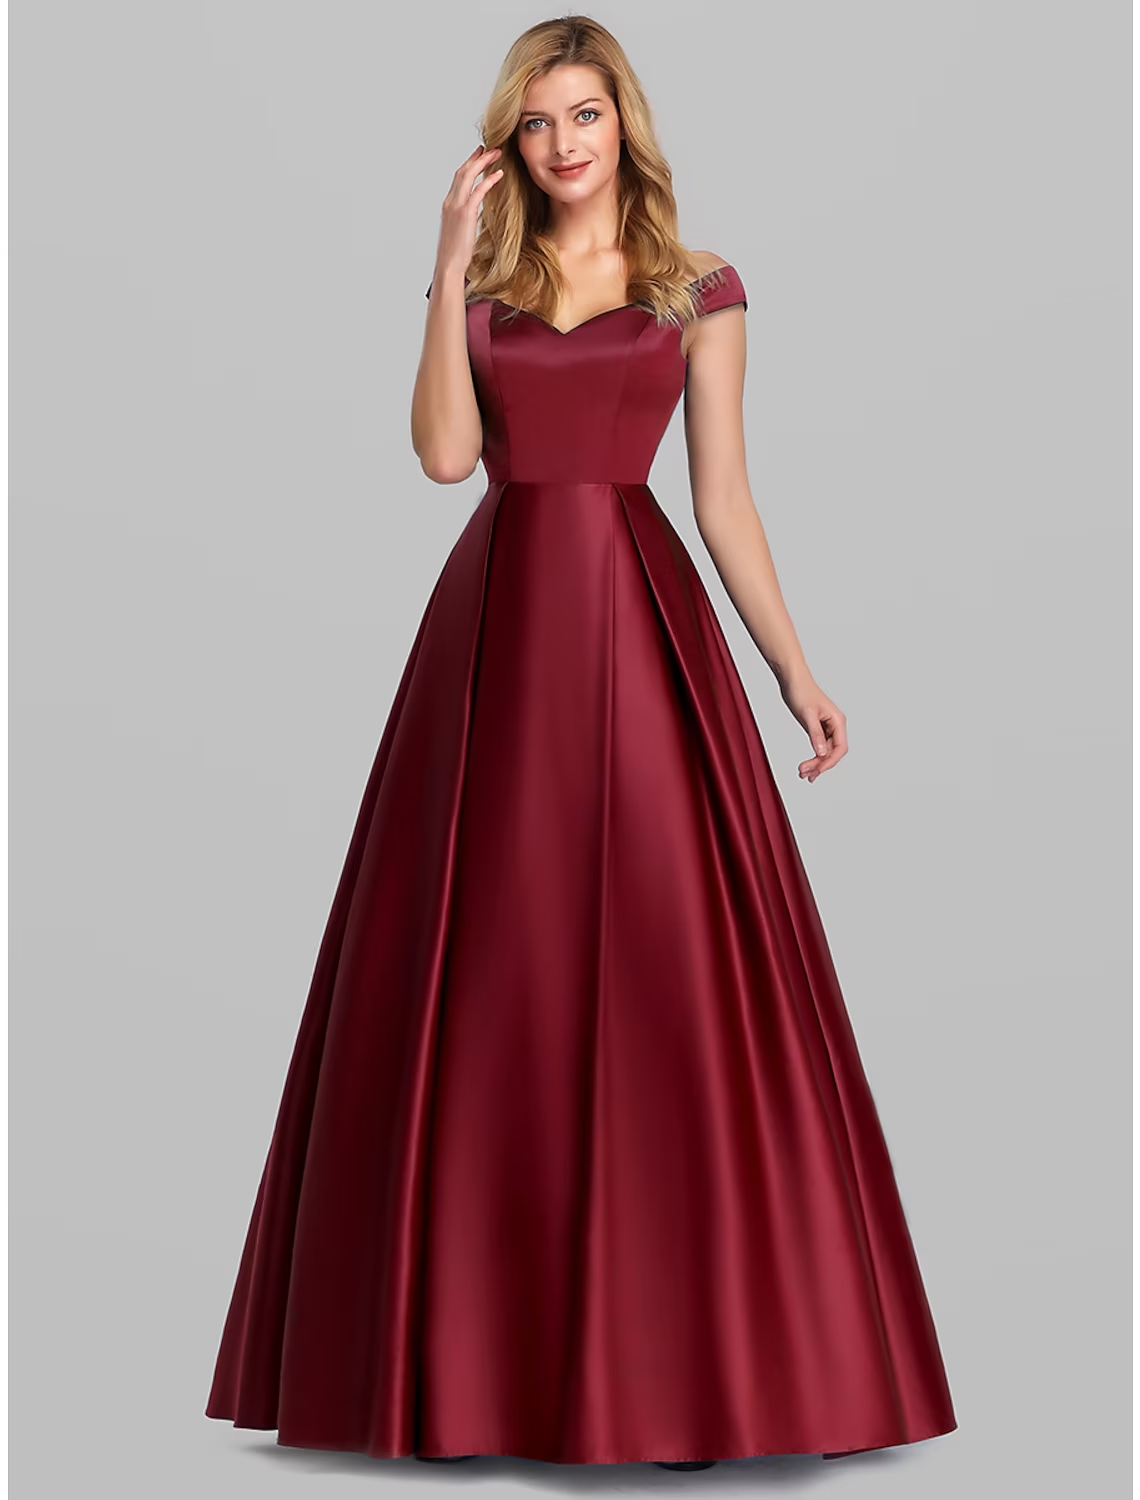 Ball Gown Elegant Quinceanera Prom Birthday Dress Off Shoulder Short Sleeve Floor Length Satin with Pleats